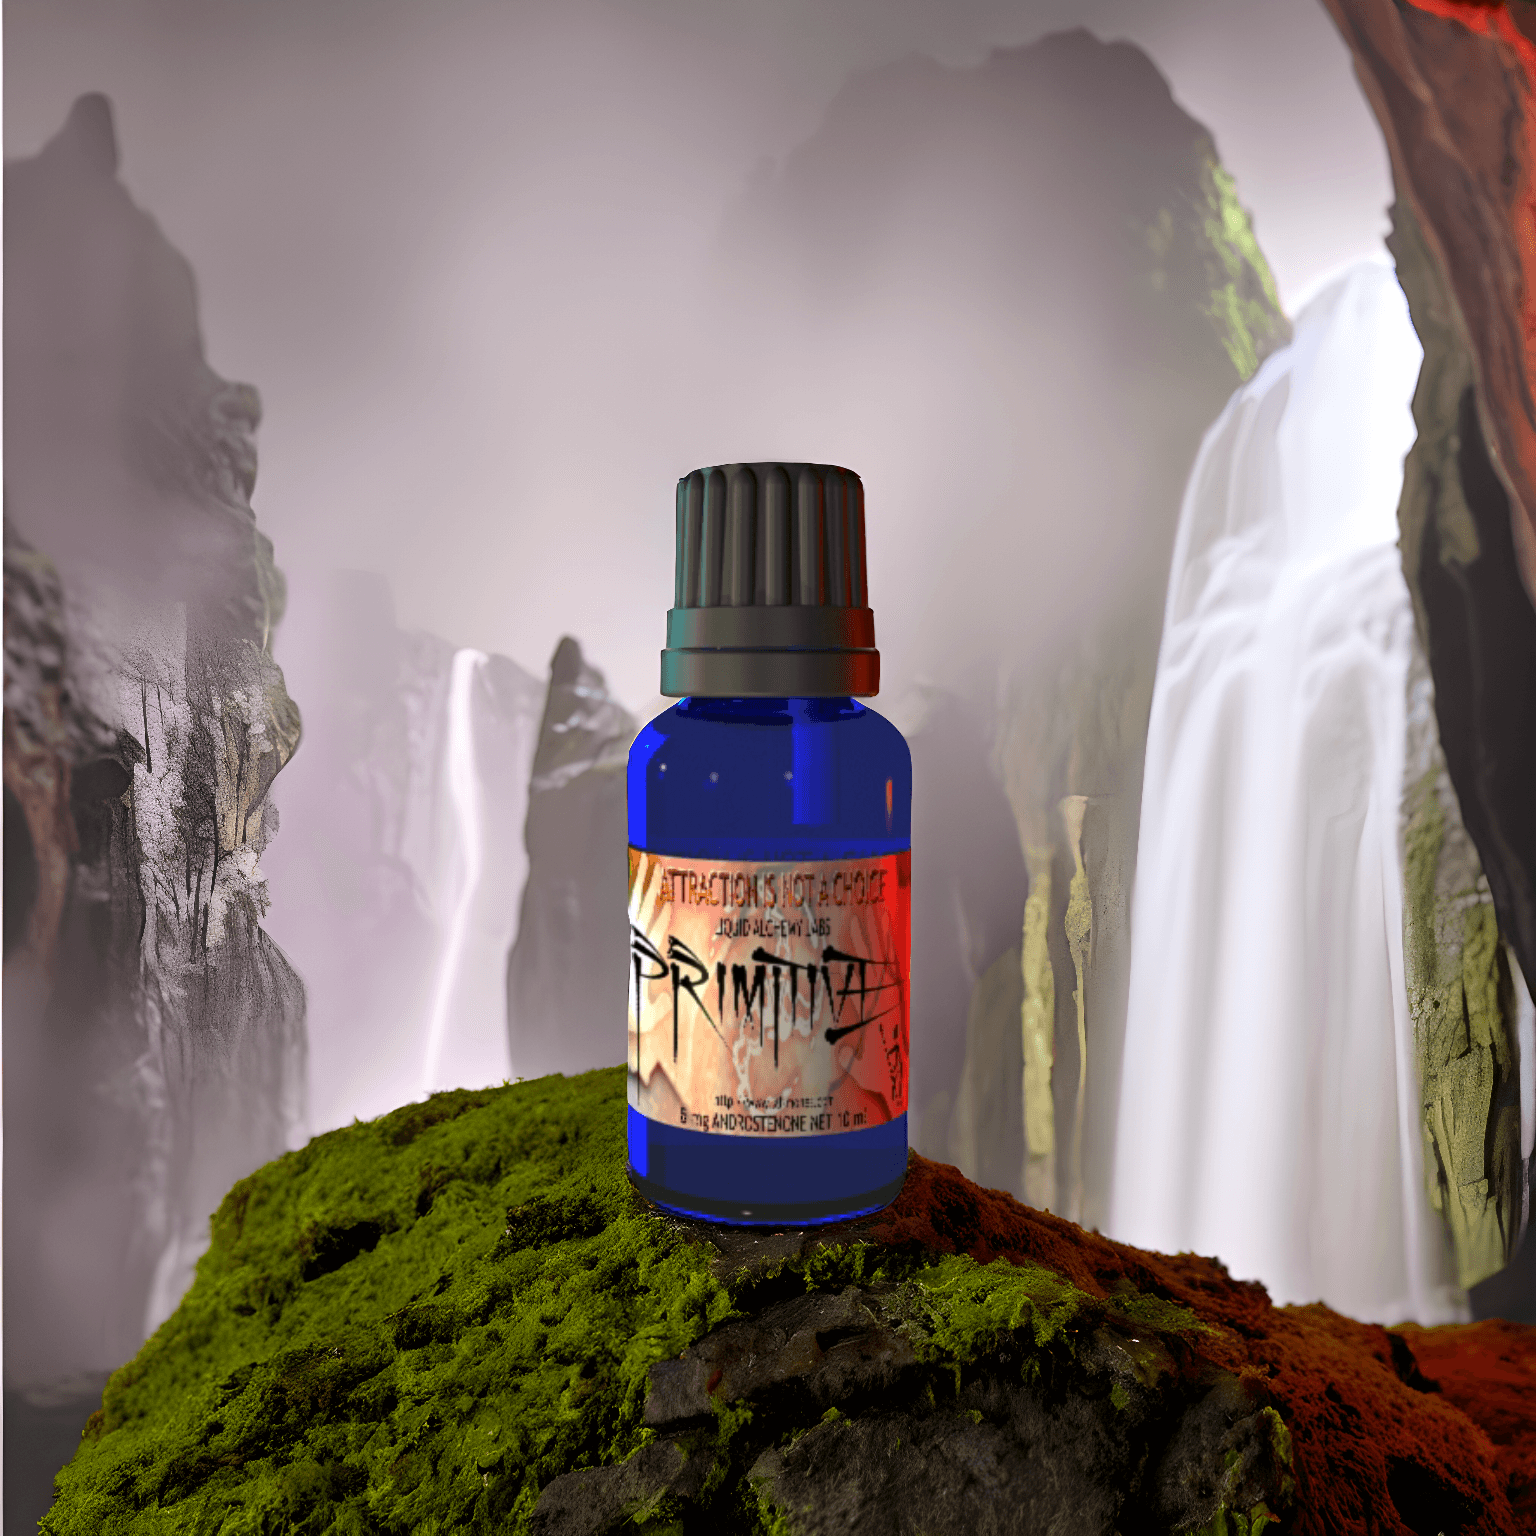 Blue bottle of PRIMITIVE™ Androstenone Pheromone Oil by Royal Pheromones on a mossy rock with a waterfall in the background; Pheromone Perfumes, Pheromone Oil, Pheromone Colognes.